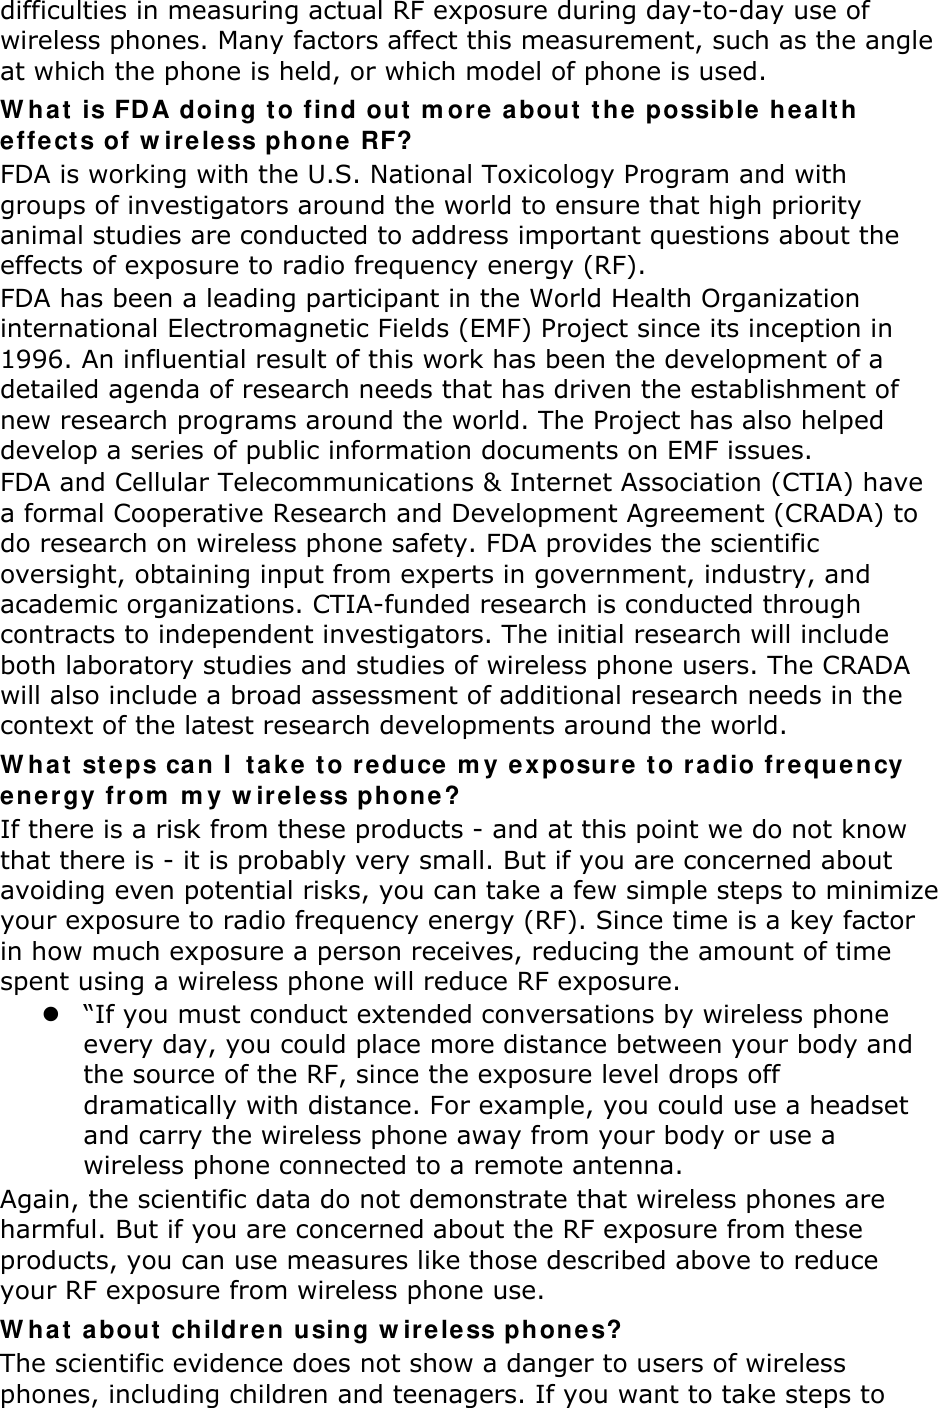 difficulties in measuring actual RF exposure during day-to-day use of wireless phones. Many factors affect this measurement, such as the angle at which the phone is held, or which model of phone is used. W hat  is FDA doing t o find out  m ore a bout  the  possible  he a lt h effect s of w ir ele ss phone  RF? FDA is working with the U.S. National Toxicology Program and with groups of investigators around the world to ensure that high priority animal studies are conducted to address important questions about the effects of exposure to radio frequency energy (RF). FDA has been a leading participant in the World Health Organization international Electromagnetic Fields (EMF) Project since its inception in 1996. An influential result of this work has been the development of a detailed agenda of research needs that has driven the establishment of new research programs around the world. The Project has also helped develop a series of public information documents on EMF issues. FDA and Cellular Telecommunications &amp; Internet Association (CTIA) have a formal Cooperative Research and Development Agreement (CRADA) to do research on wireless phone safety. FDA provides the scientific oversight, obtaining input from experts in government, industry, and academic organizations. CTIA-funded research is conducted through contracts to independent investigators. The initial research will include both laboratory studies and studies of wireless phone users. The CRADA will also include a broad assessment of additional research needs in the context of the latest research developments around the world. W hat  st eps ca n I  t a k e t o reduce m y ex posure  t o radio freque ncy ener gy from  m y w ire less ph one ? If there is a risk from these products - and at this point we do not know that there is - it is probably very small. But if you are concerned about avoiding even potential risks, you can take a few simple steps to minimize your exposure to radio frequency energy (RF). Since time is a key factor in how much exposure a person receives, reducing the amount of time spent using a wireless phone will reduce RF exposure.  “If you must conduct extended conversations by wireless phone every day, you could place more distance between your body and the source of the RF, since the exposure level drops off dramatically with distance. For example, you could use a headset and carry the wireless phone away from your body or use a wireless phone connected to a remote antenna. Again, the scientific data do not demonstrate that wireless phones are harmful. But if you are concerned about the RF exposure from these products, you can use measures like those described above to reduce your RF exposure from wireless phone use. W hat  about  childre n using w irele ss phone s? The scientific evidence does not show a danger to users of wireless phones, including children and teenagers. If you want to take steps to 